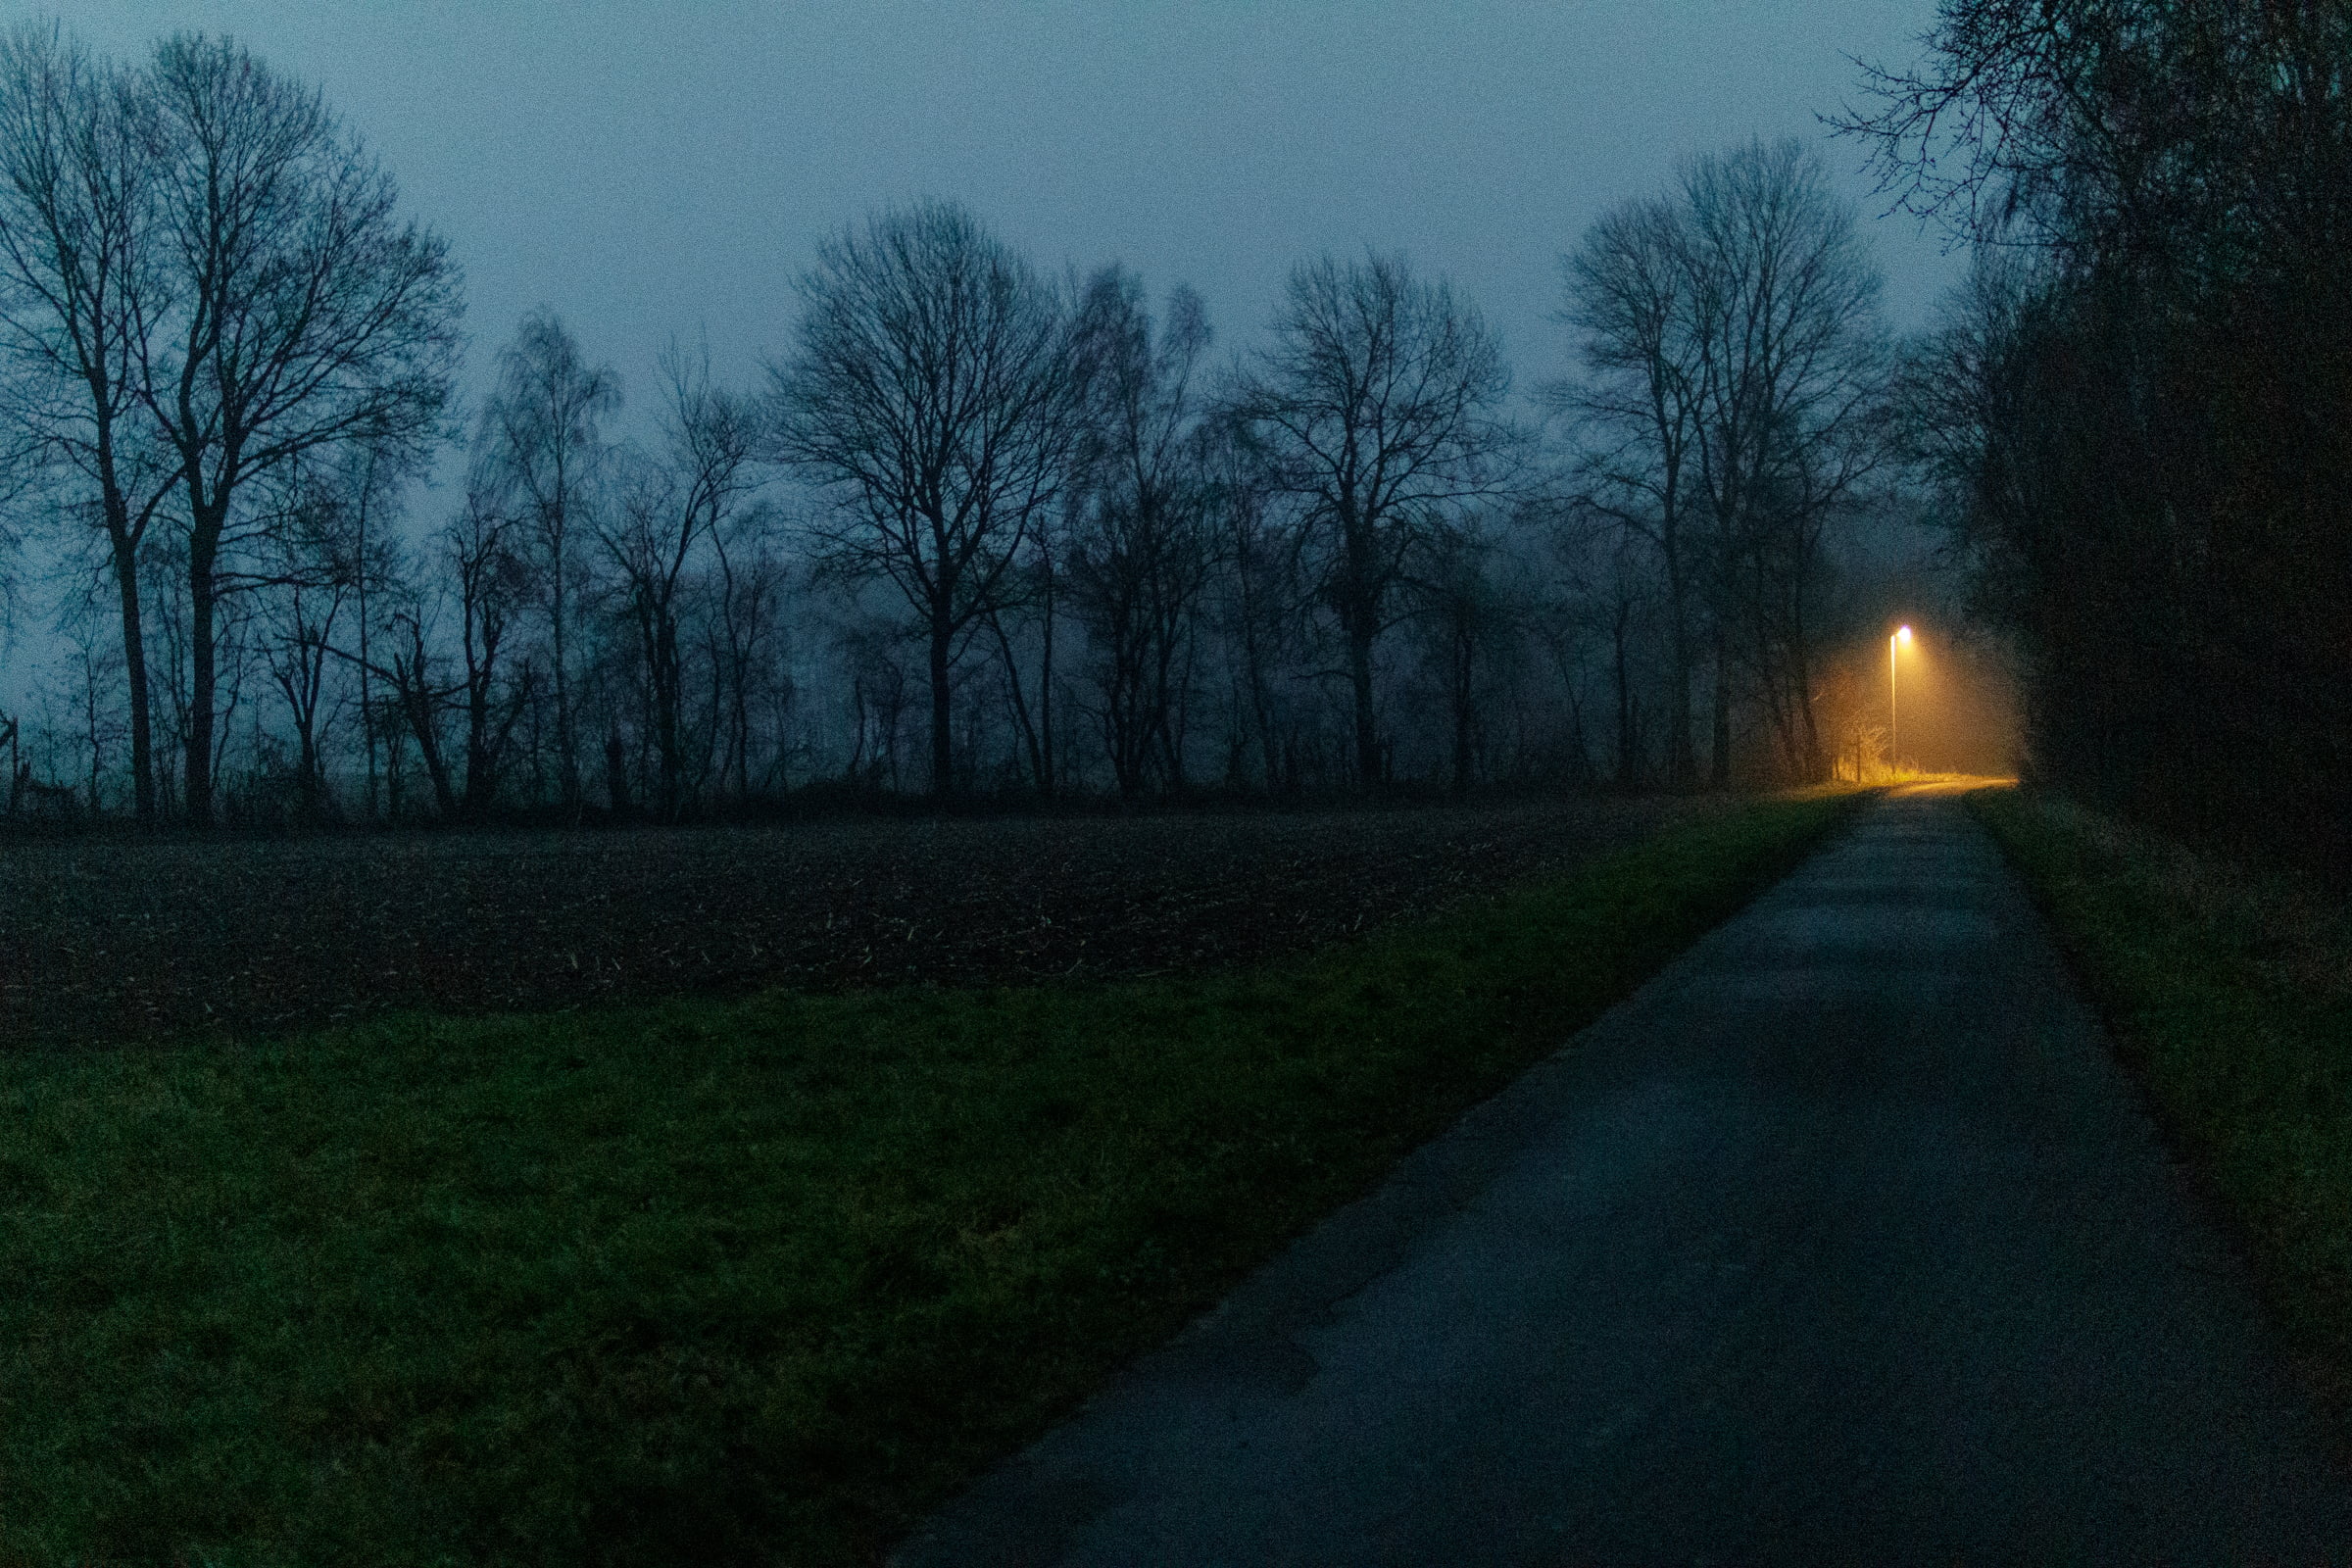 A path next to a dark field leading towards a bright yellow streetlight at dusk.